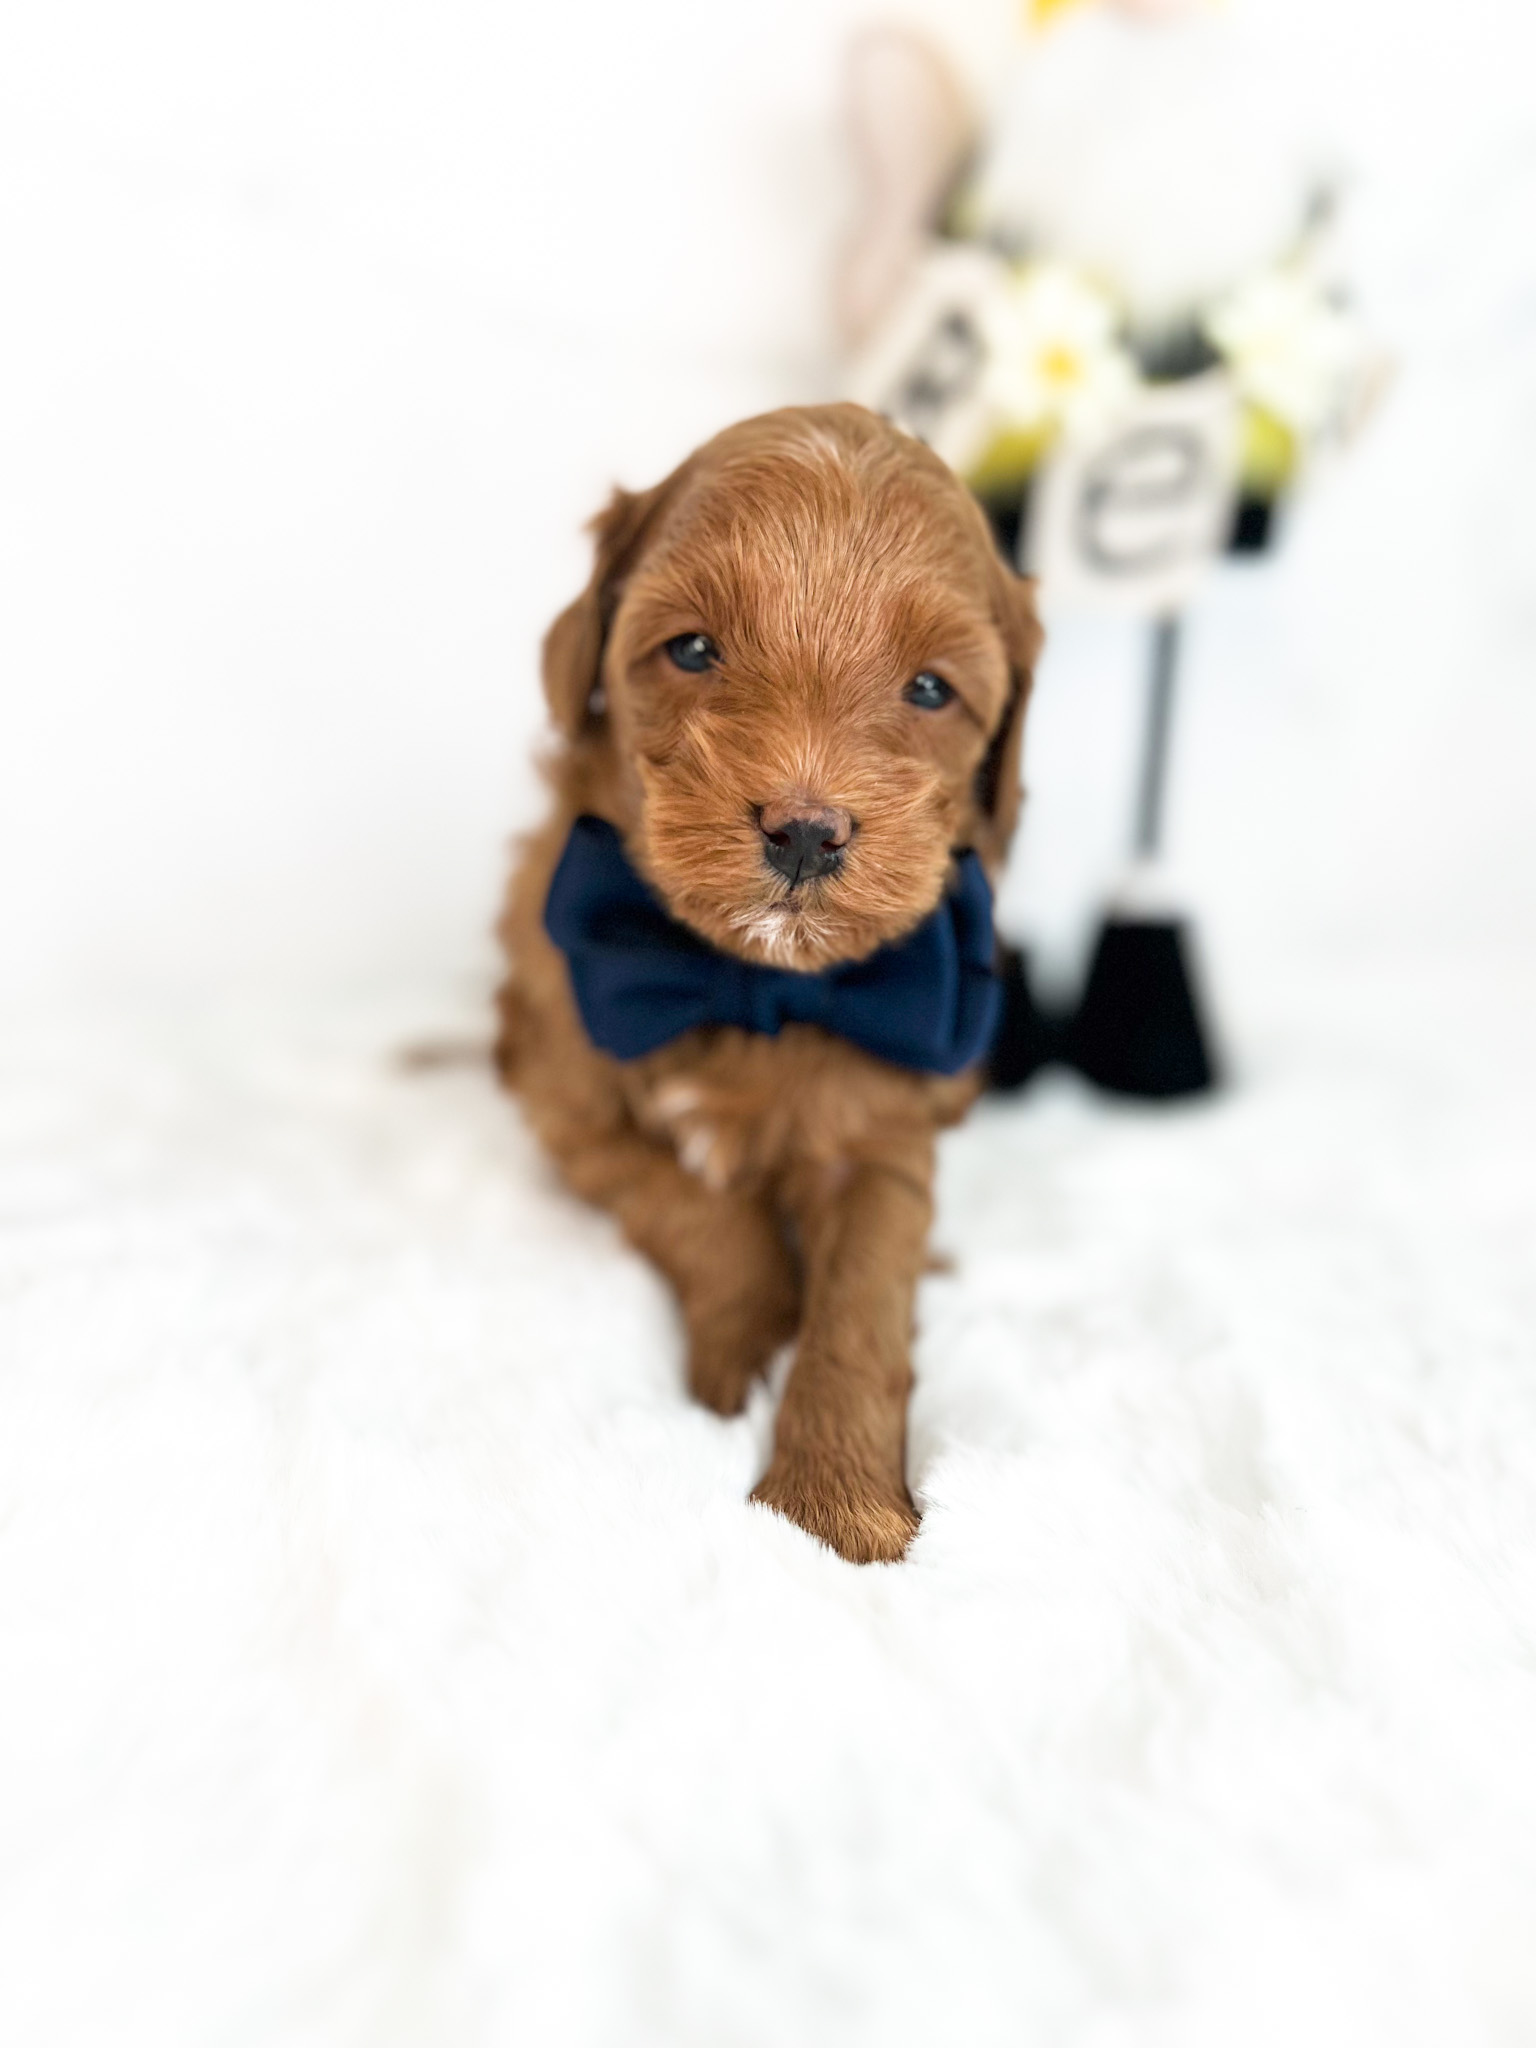 A small brown puppy with floppy ears and innocent eyes, looking adorable in a neatly tied blue bow tie.